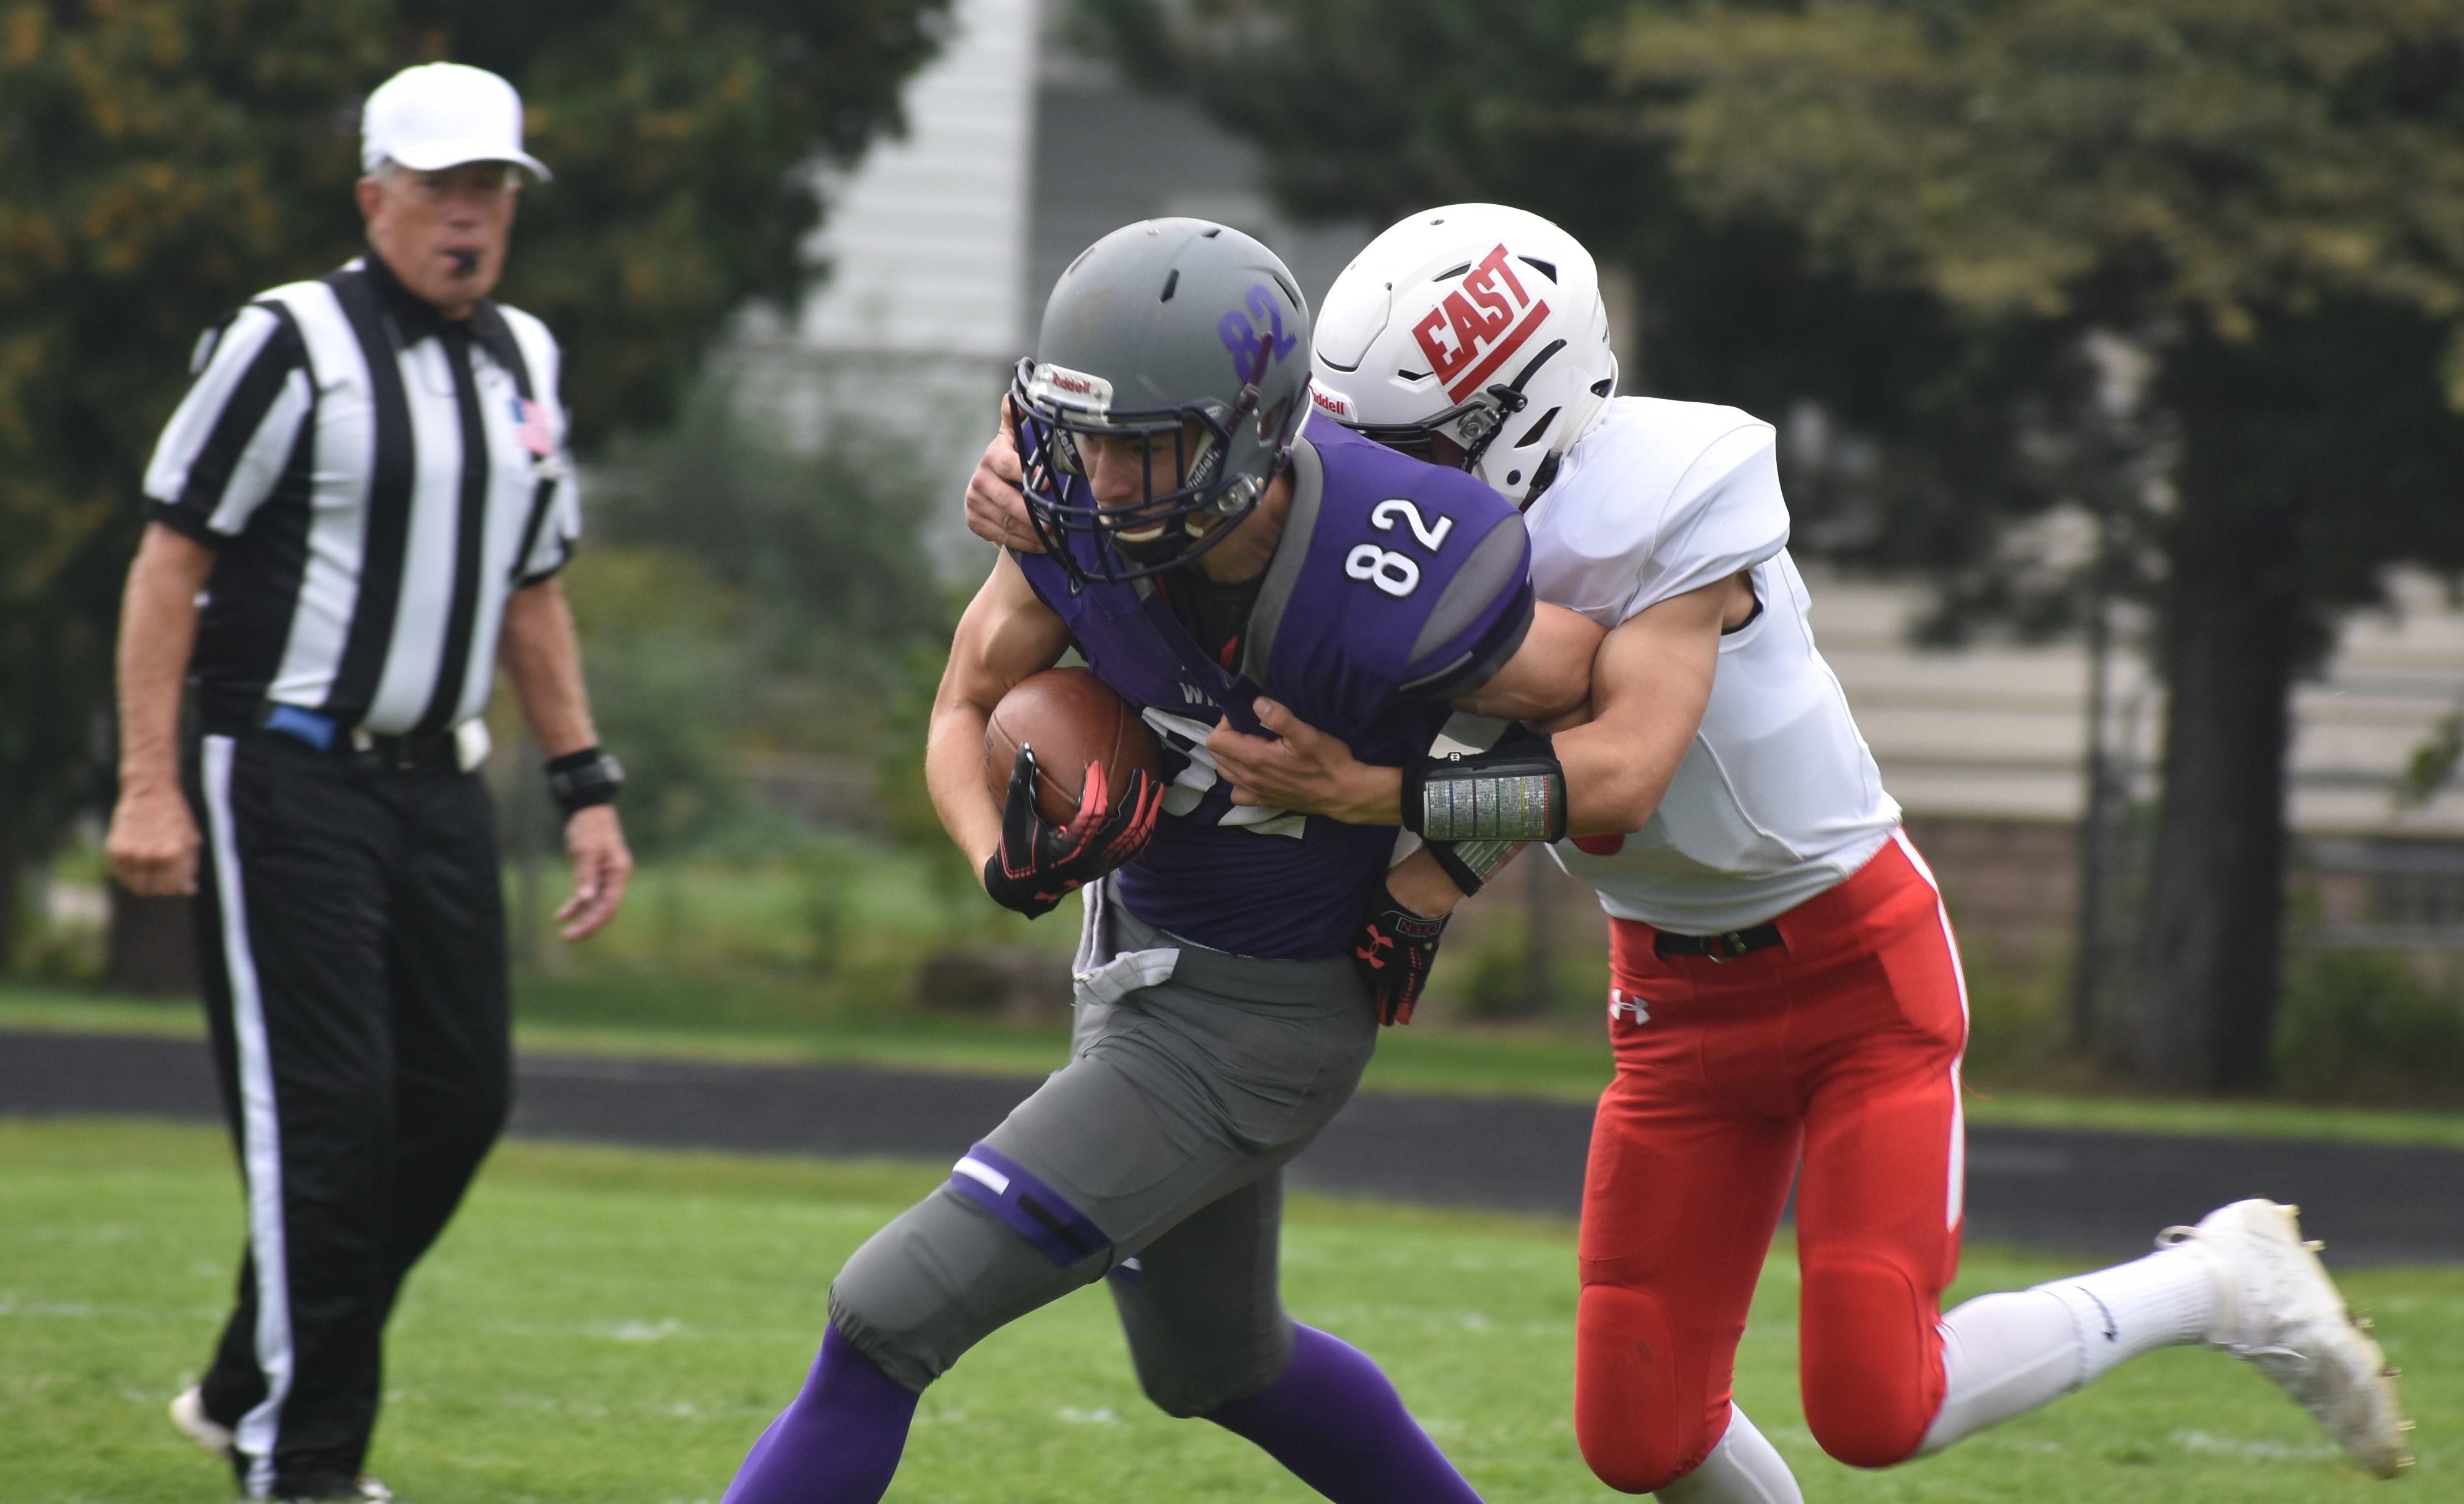 Red Devils defeat Wildcats in 114th meeting on gridiron